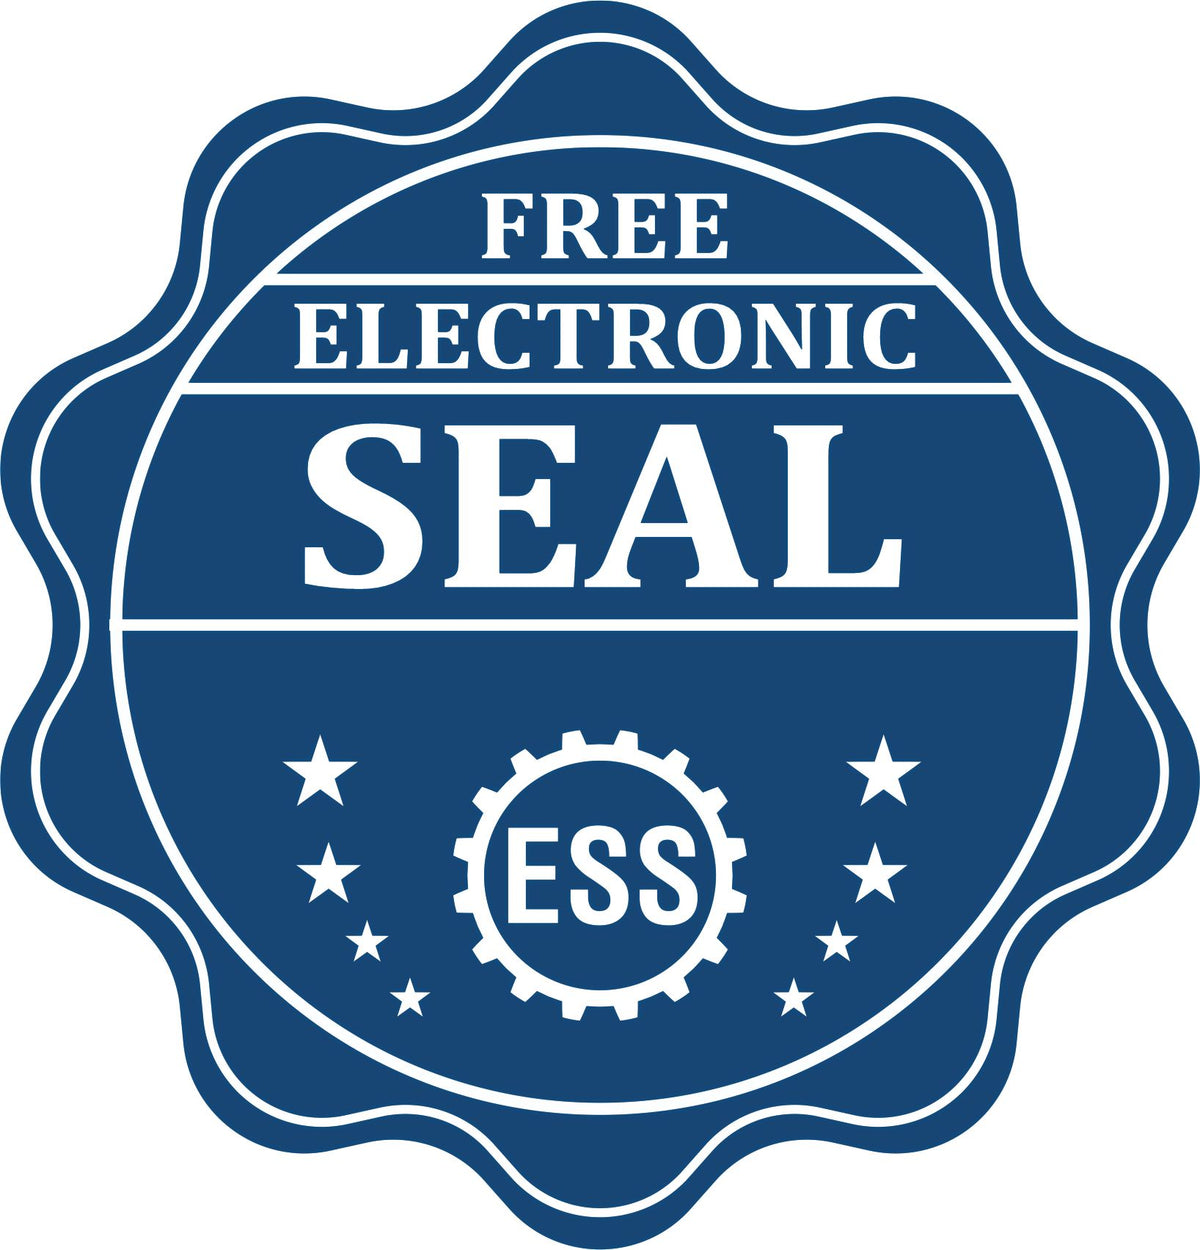 A badge showing a free electronic seal for the State of Virginia Extended Long Reach Engineer Seal with stars and the ESS gear on the emblem.